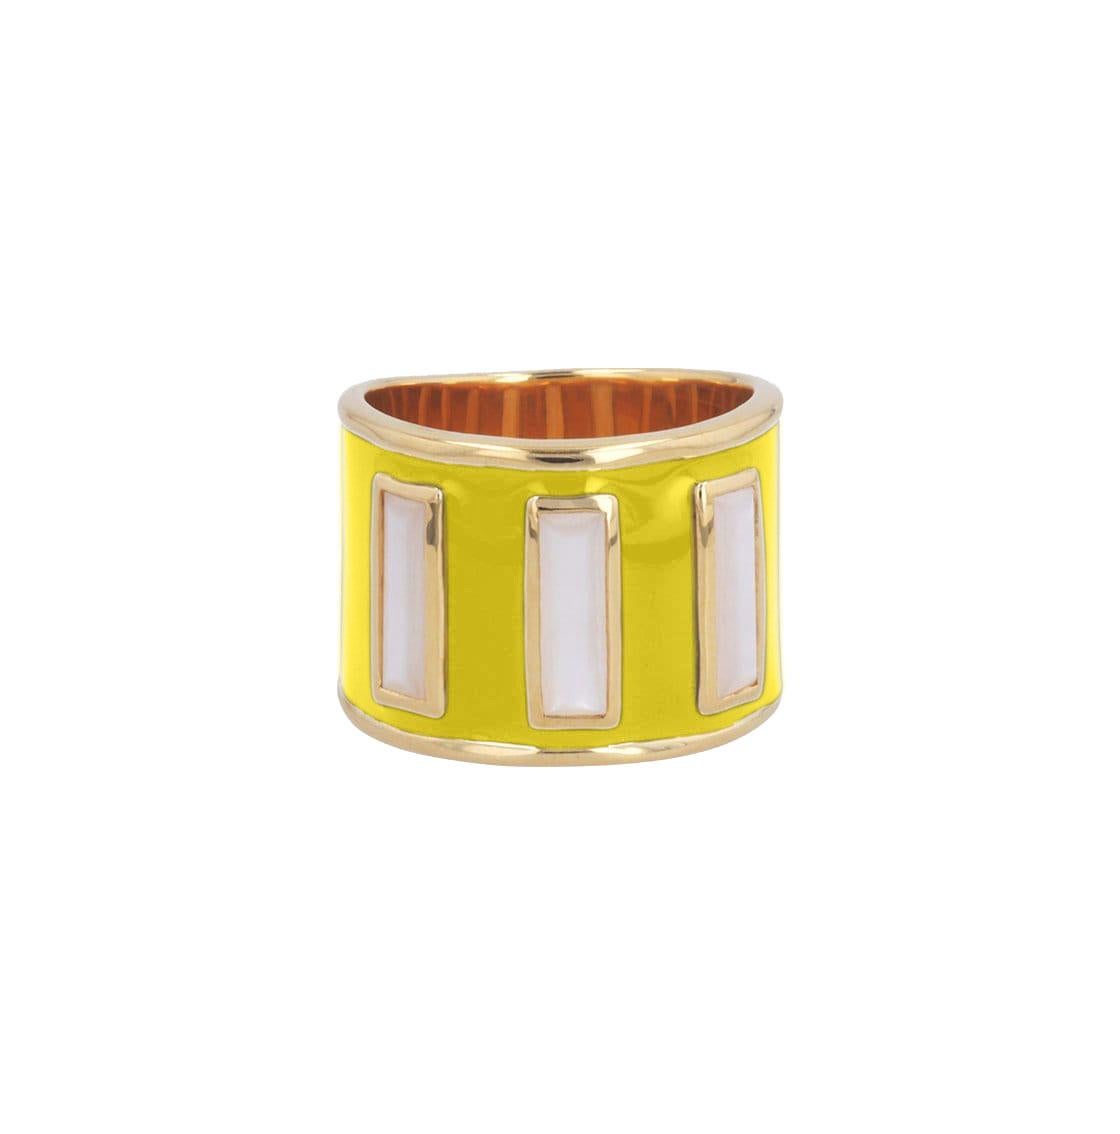 Women's Limited Edition Gigi Enamel Ring in New Colors with Mother of Pearl For Sale